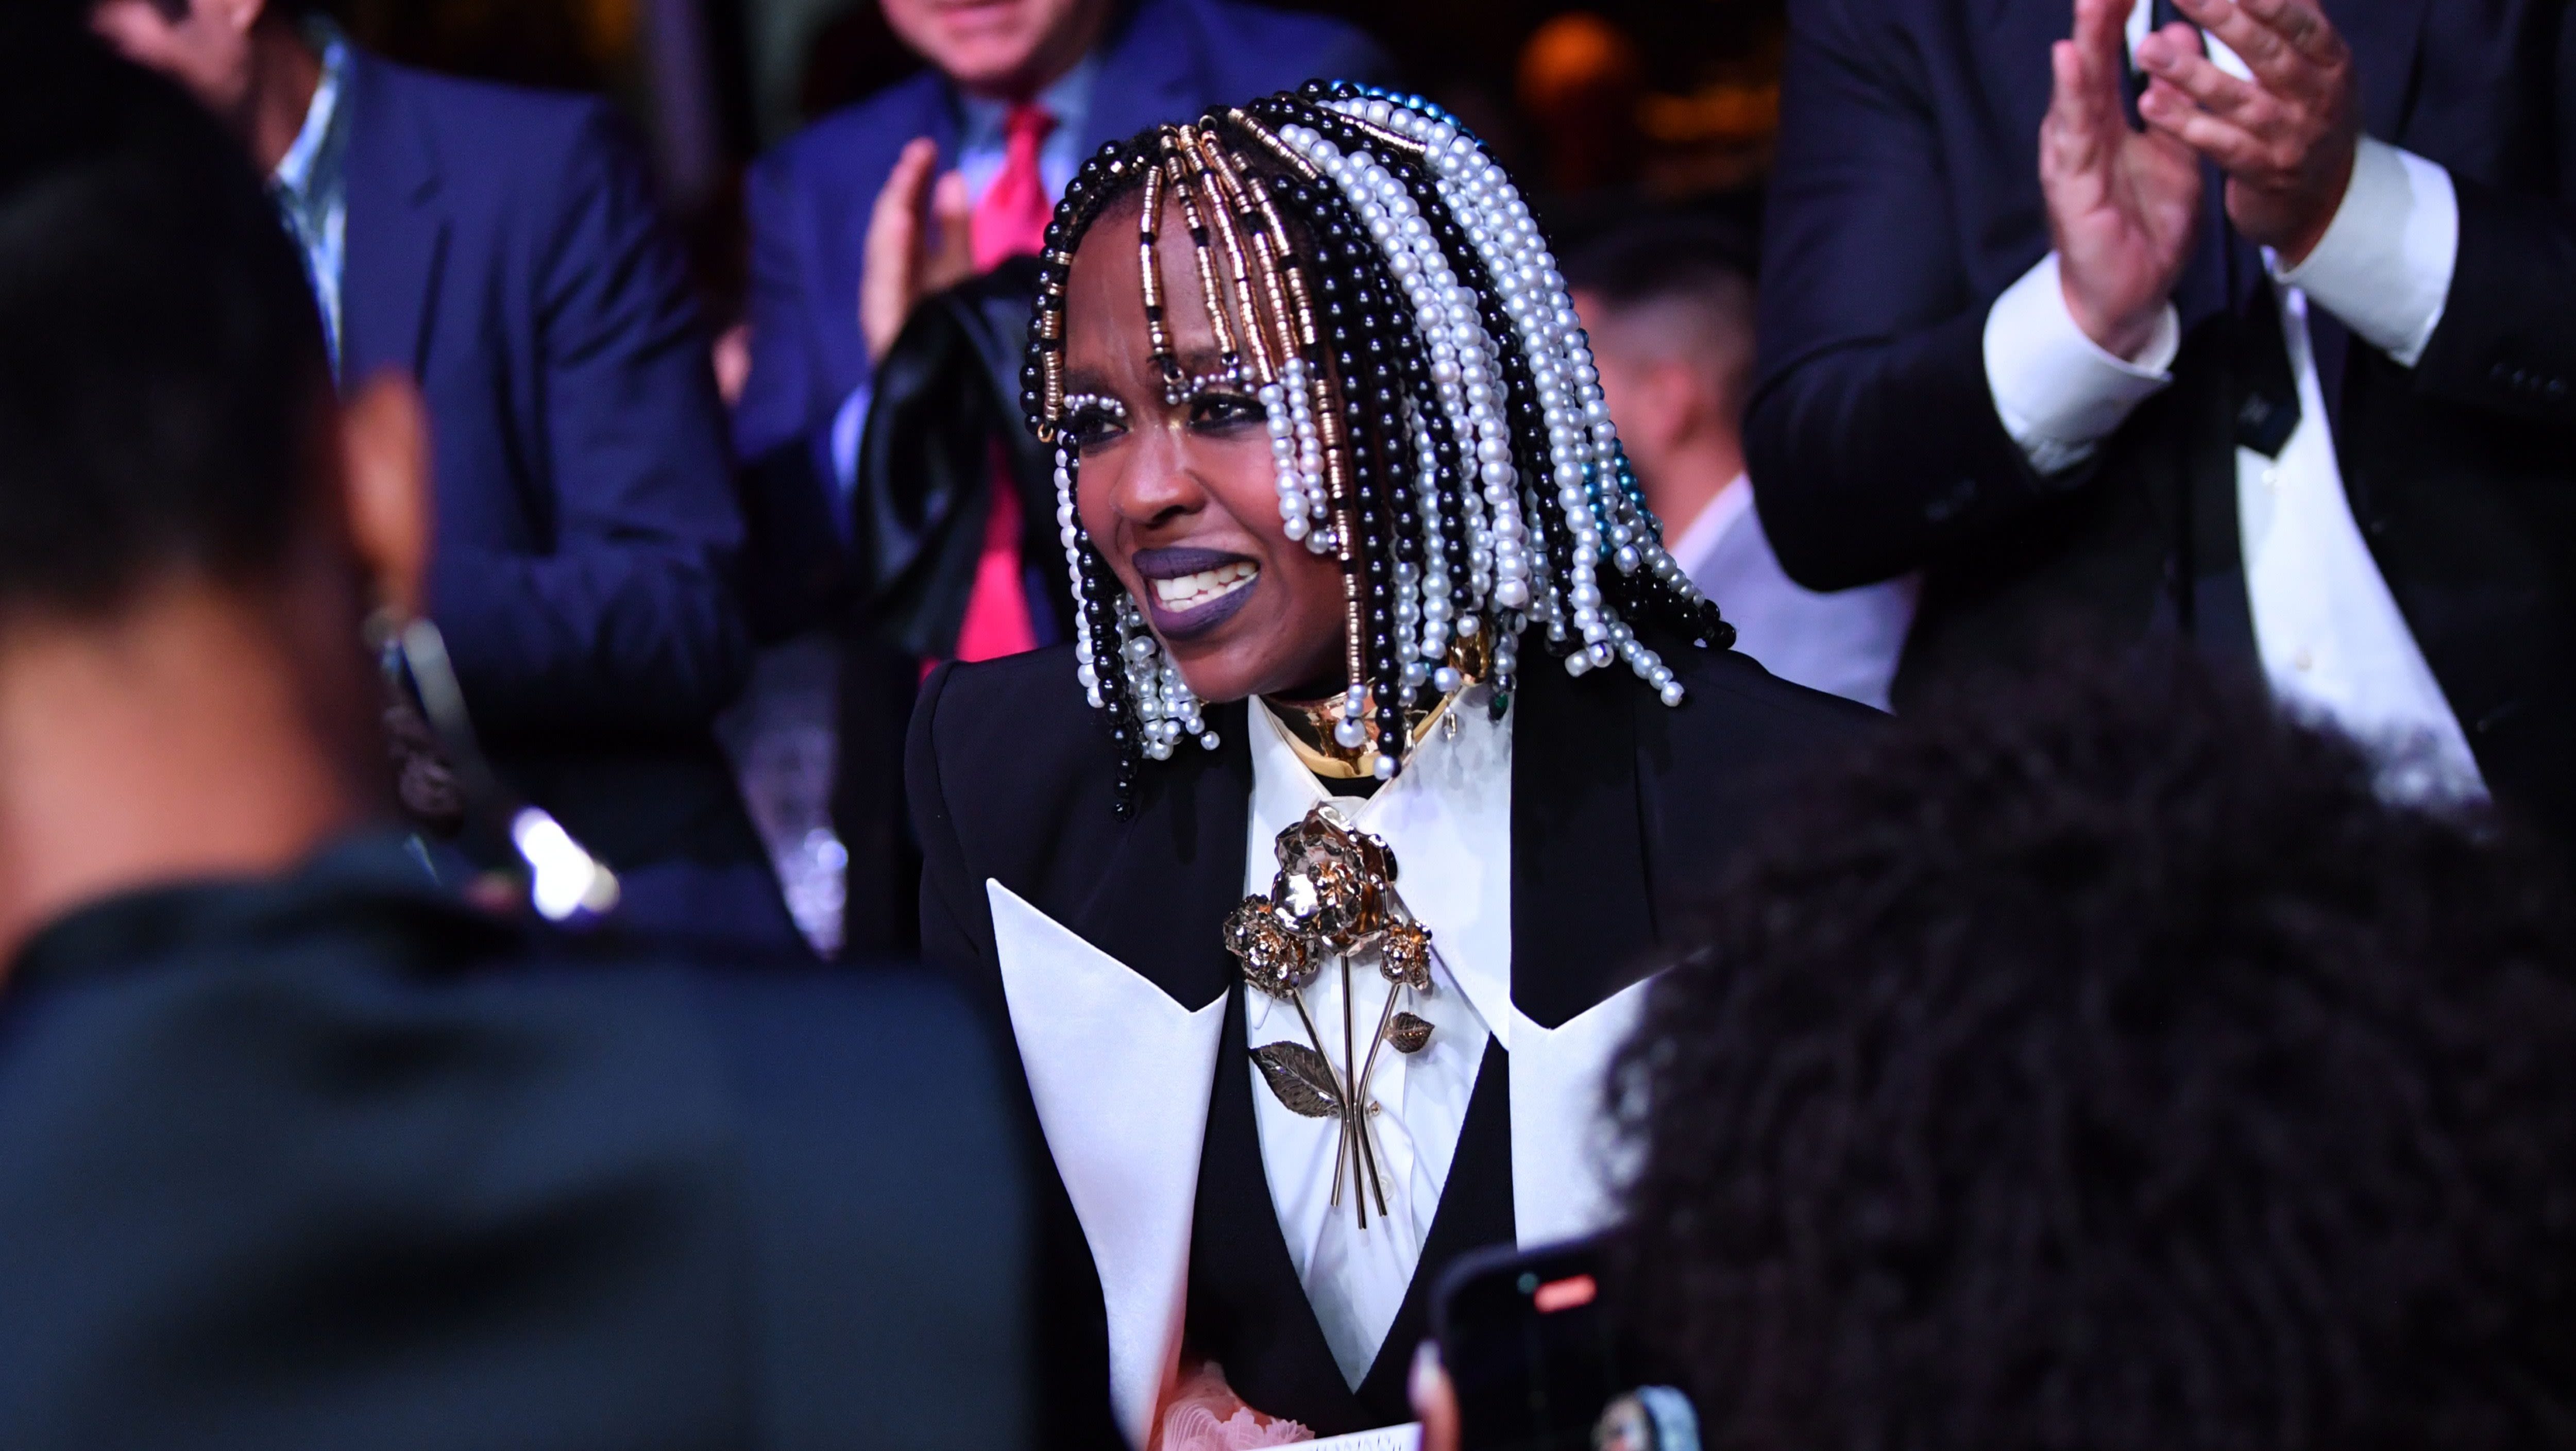 Ms. Lauryn Hill’s ‘Miseducation Of Lauryn Hill’ Inducted Into GRAMMY Hall Of Fame At Inaugural Gala